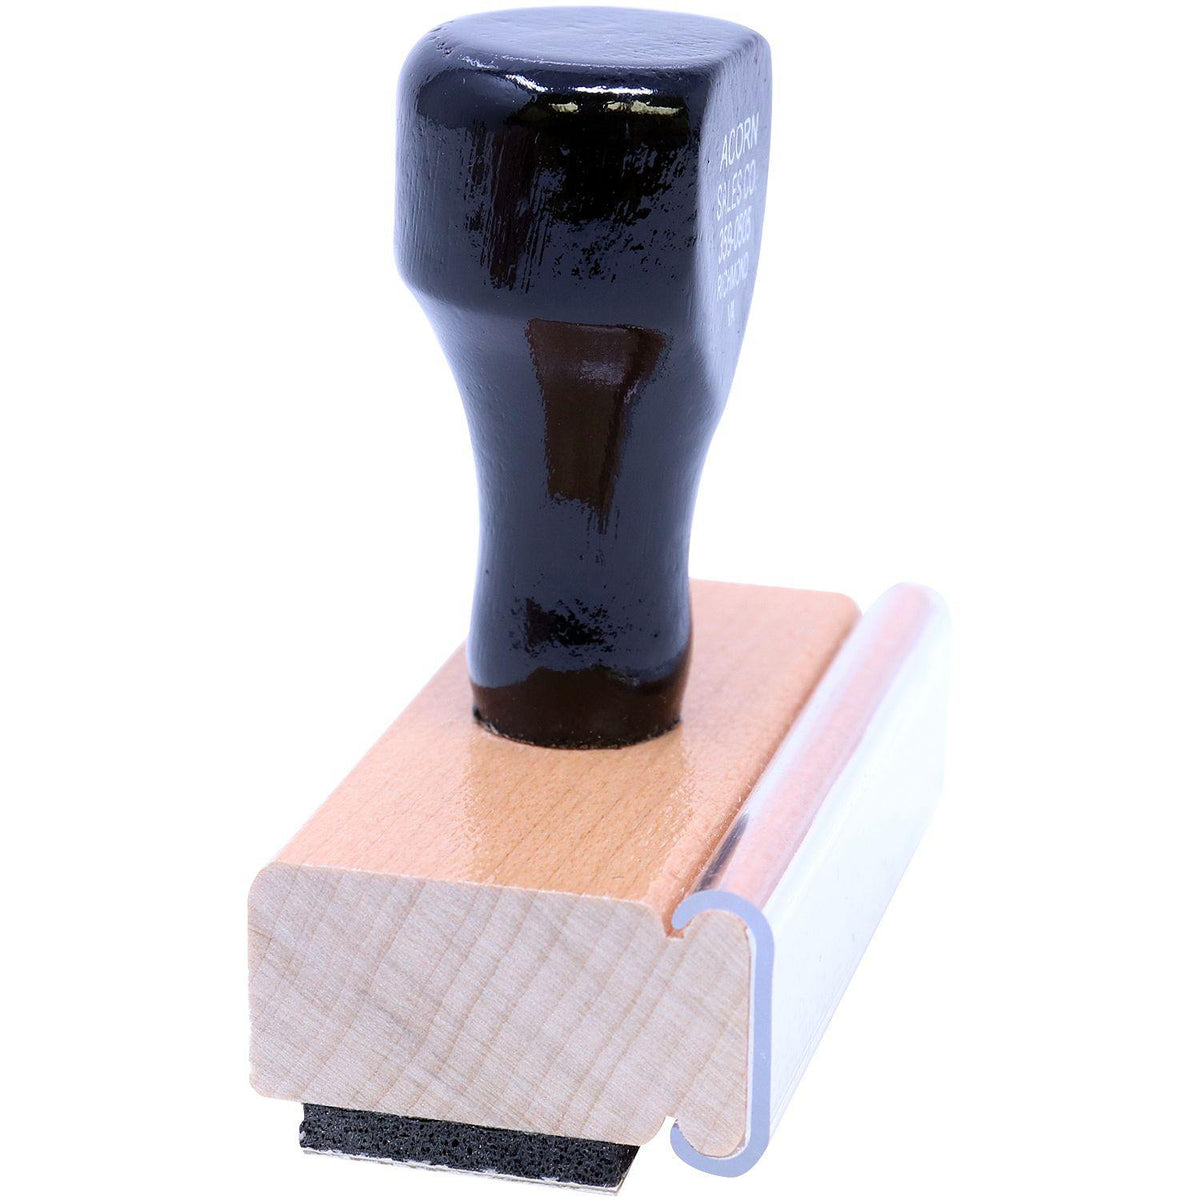 Large Star Rubber Stamp - Engineer Seal Stamps - Brand_Acorn, Impression Size_Large, Stamp Type_Regular Stamp, Type of Use_Teacher